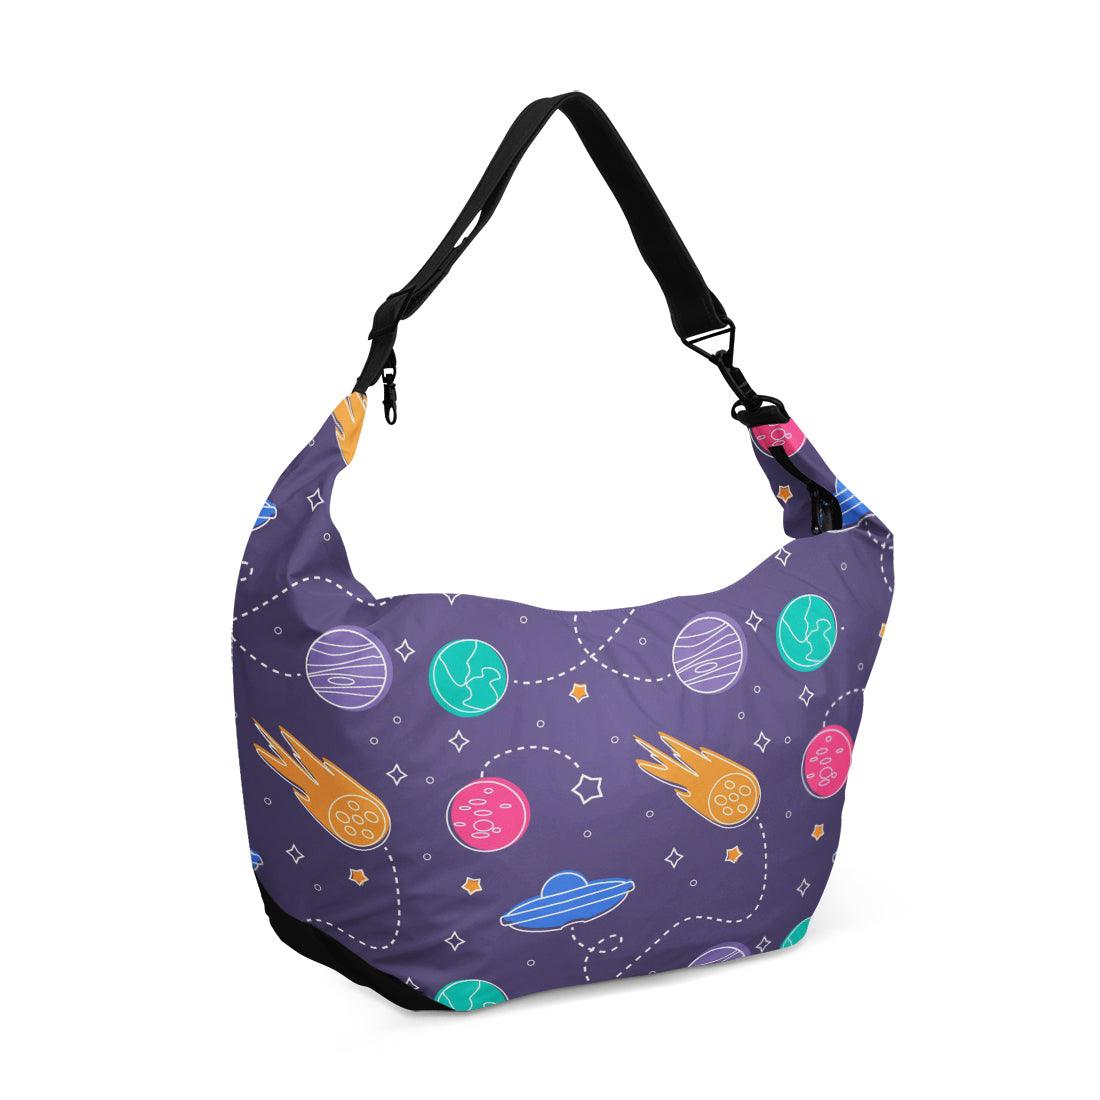 Crescent bag Free Space